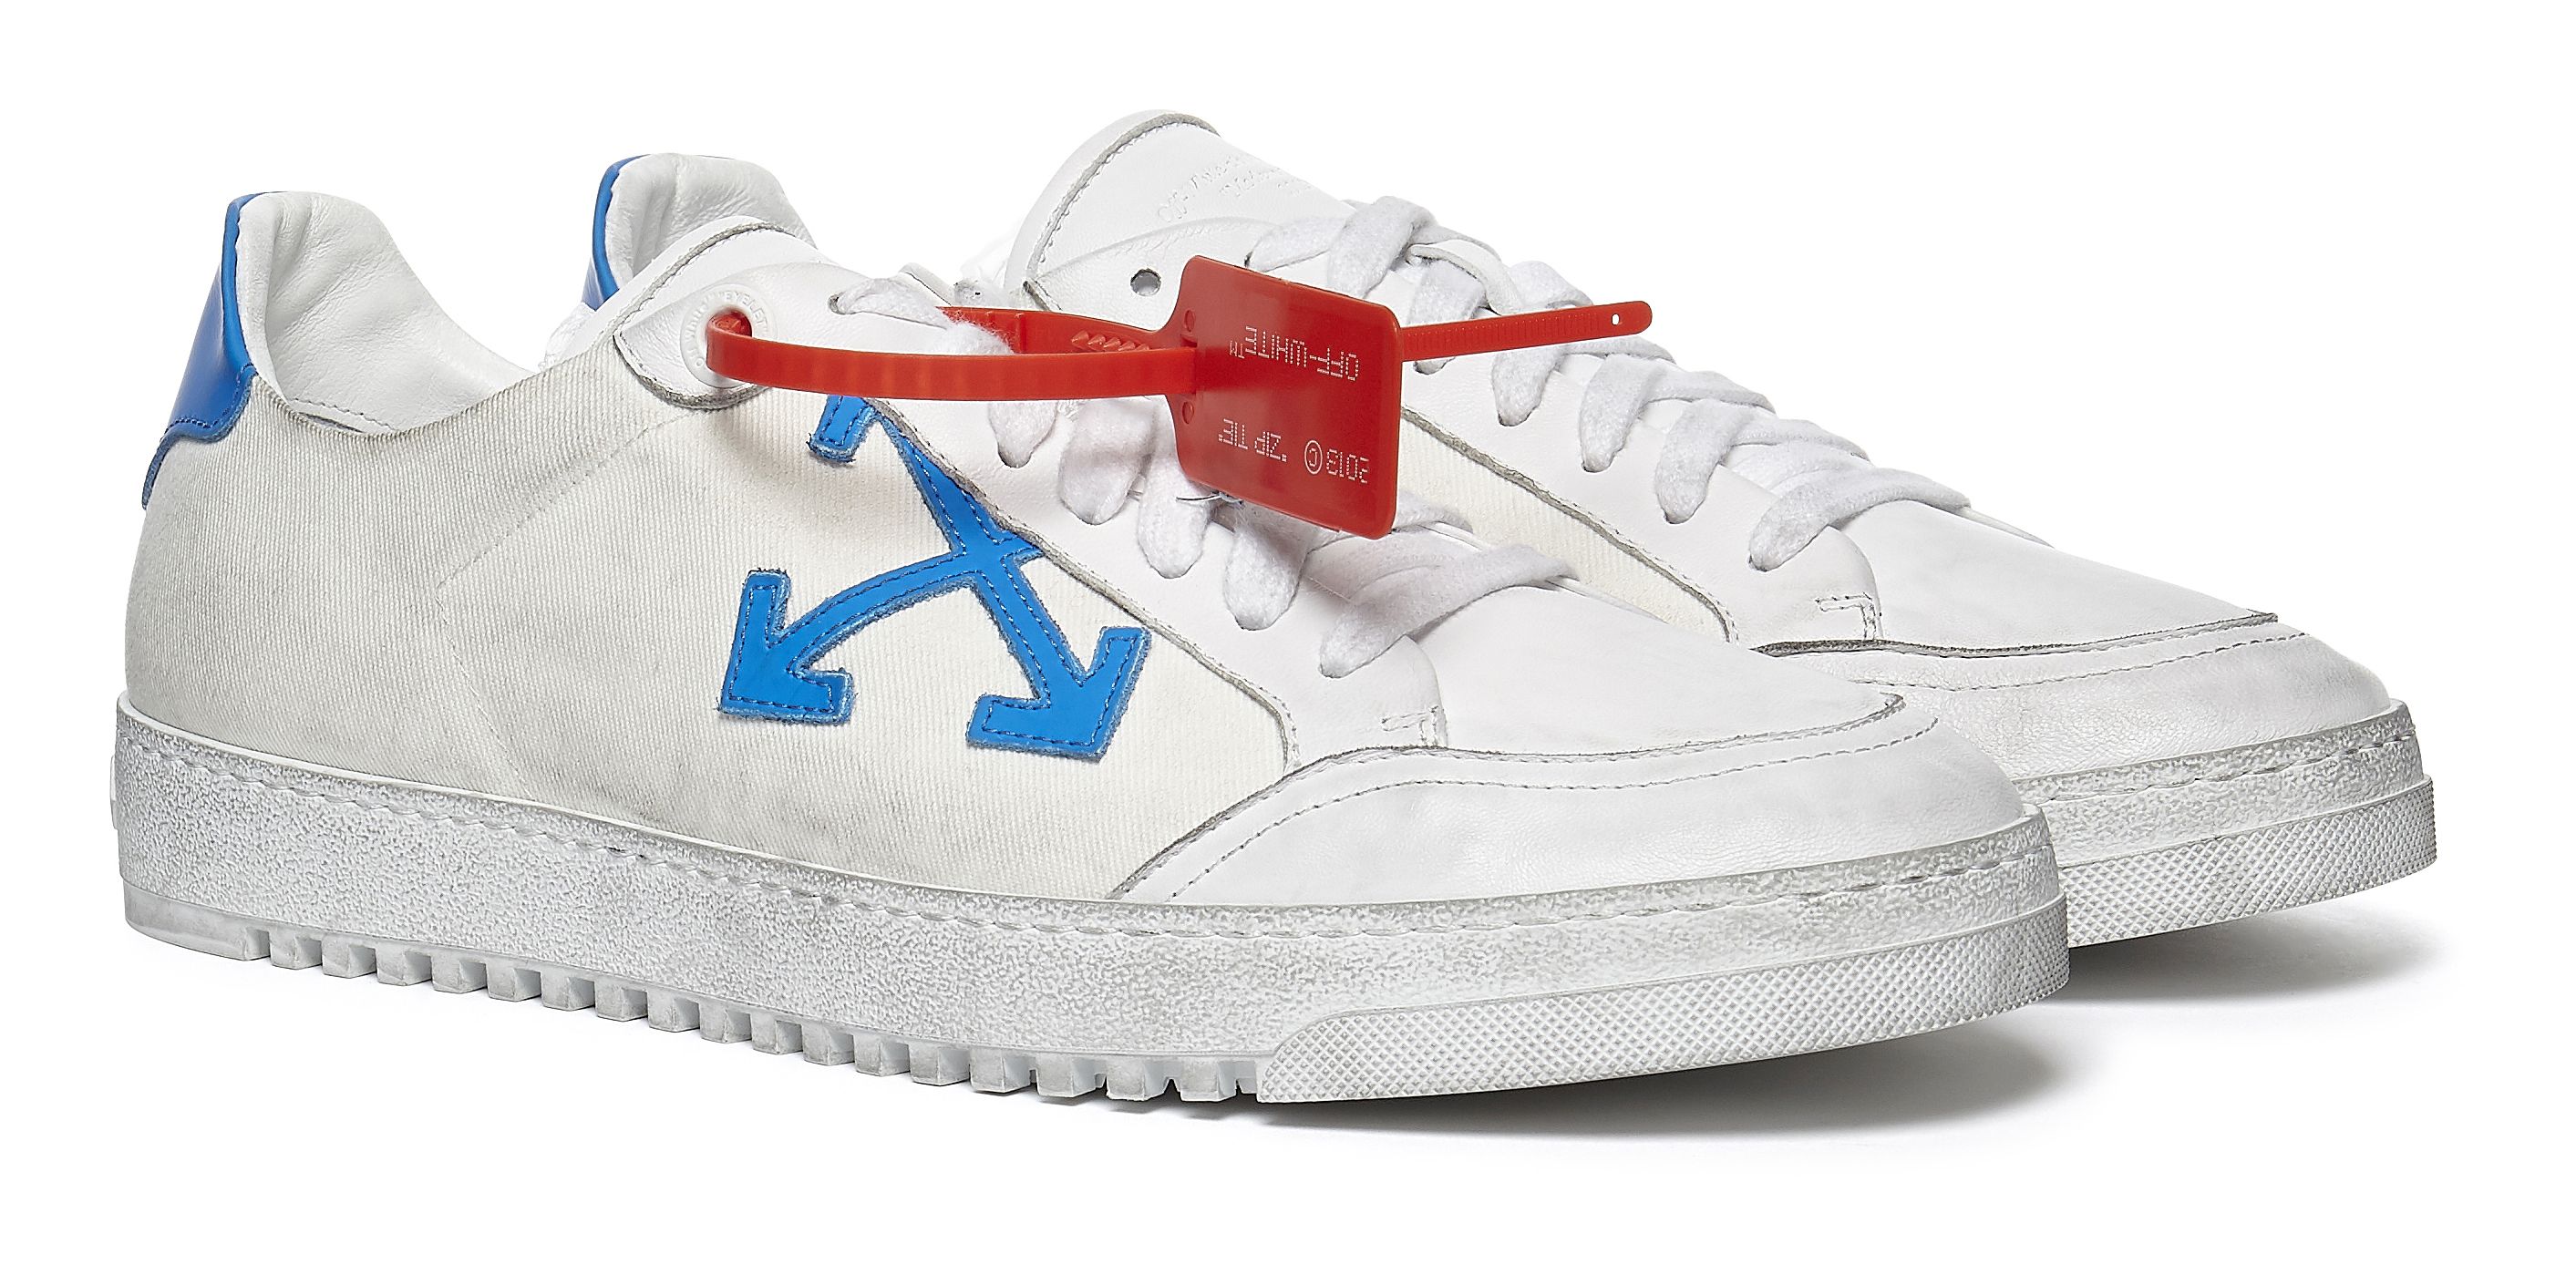 OFF-WHITE & MR PORTER to Drop Exclusive Modern Office Collab